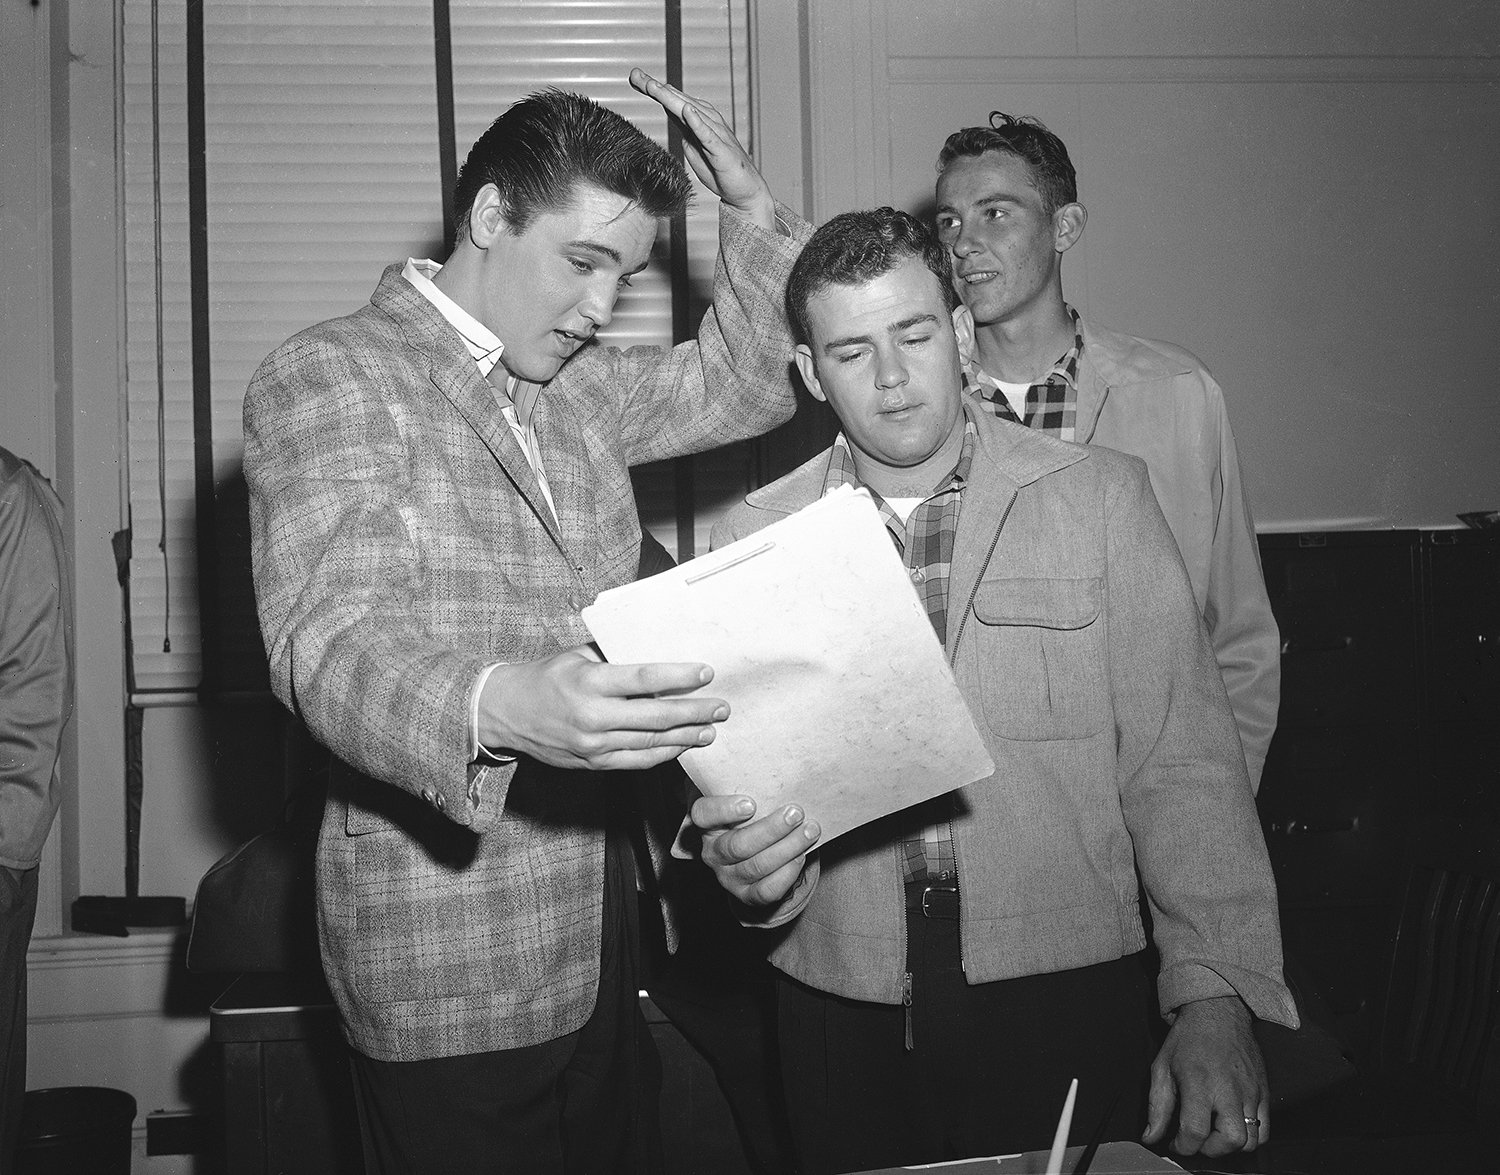  Elvis Presley, left, 23-year-old rock 'n' roll   singer, gestures at his short hair as he chats with a former school chum, Farley Gey, 22, who is entering the Army with Elvis, in Memphis, Tenn., March 24, 1958. Robert Maharrey, 22, another inductee,